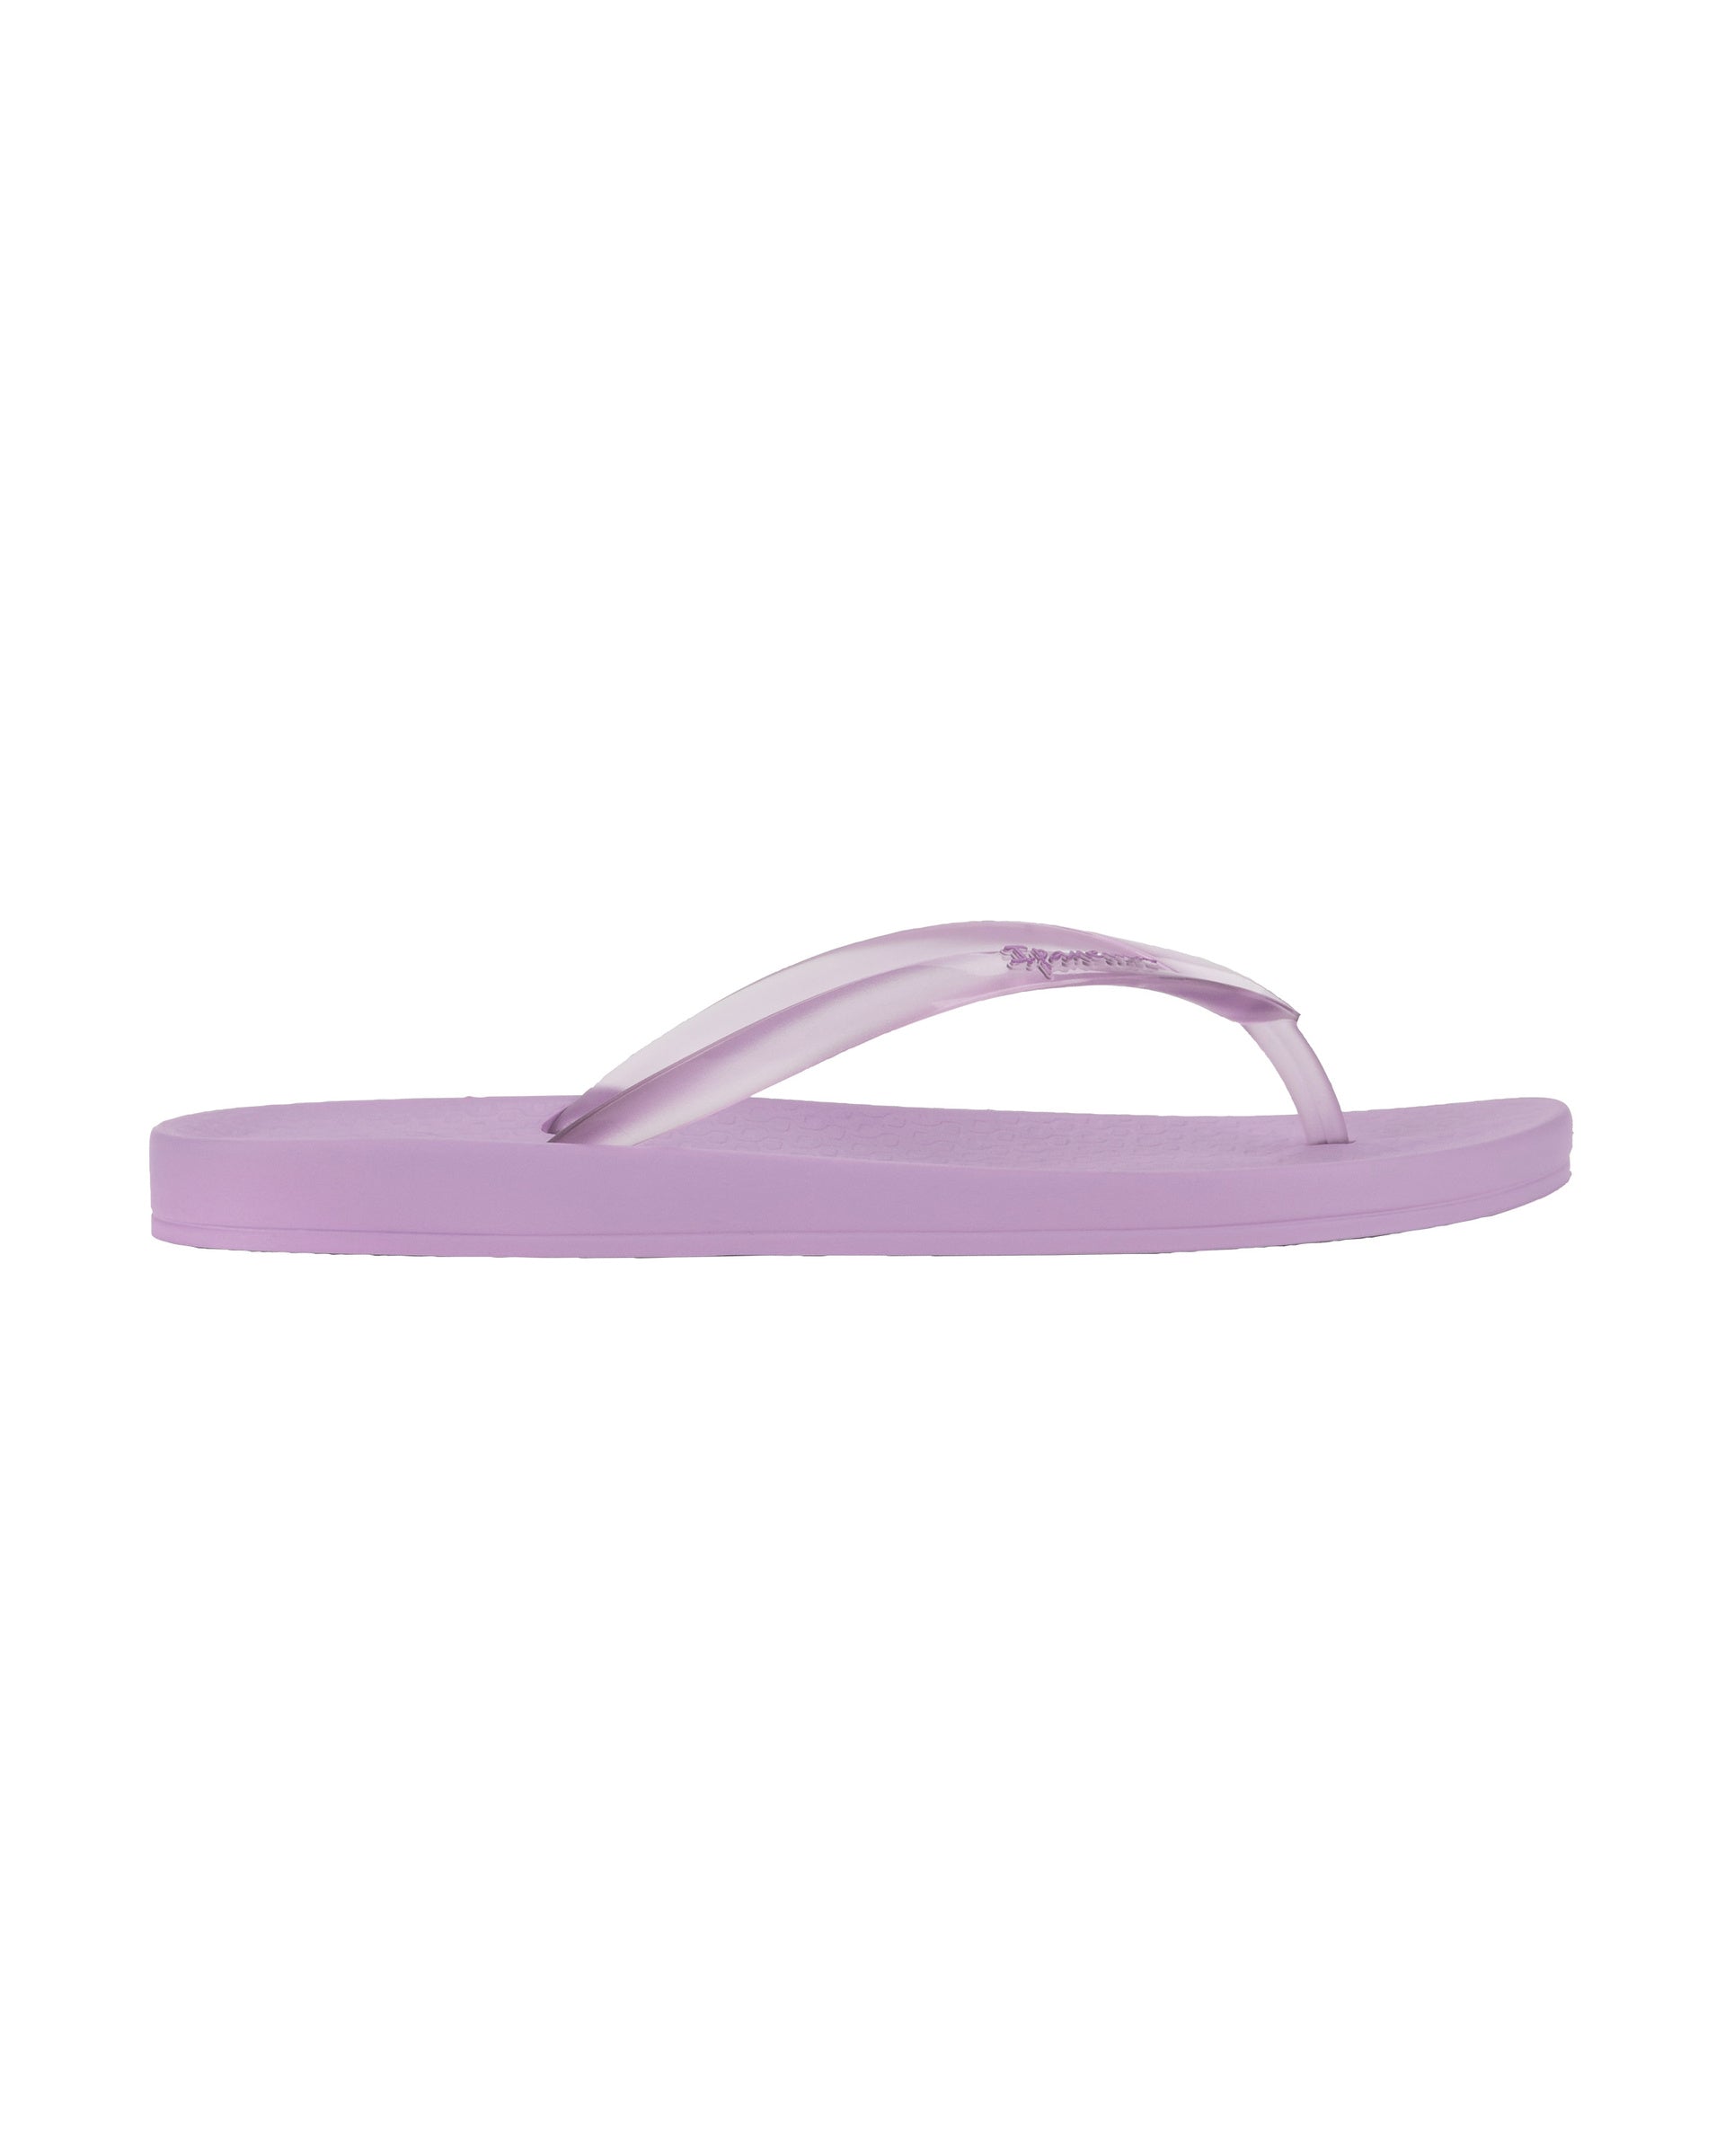 Outer side view of a purple Ipanema Ana Connect women's flip flop with a clear purple strap.